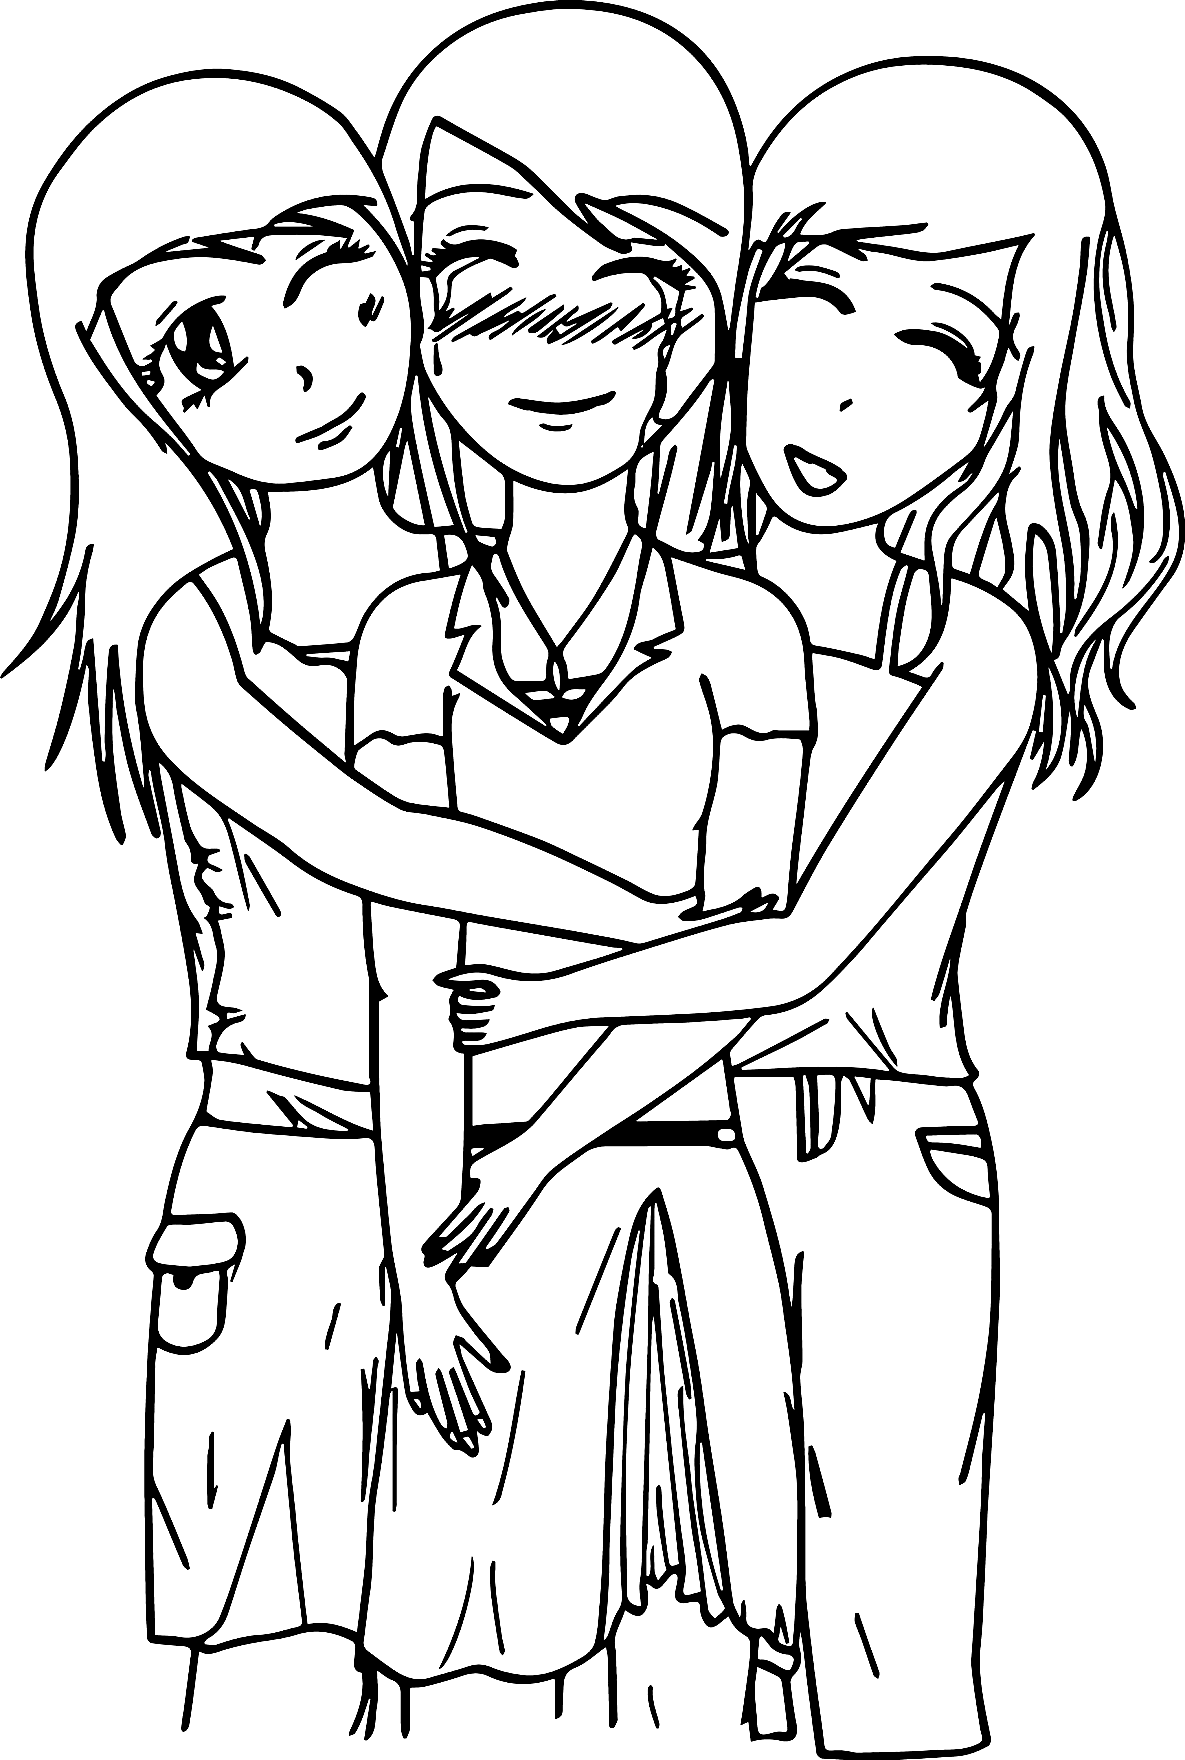 Three Best Friends Coloring Page